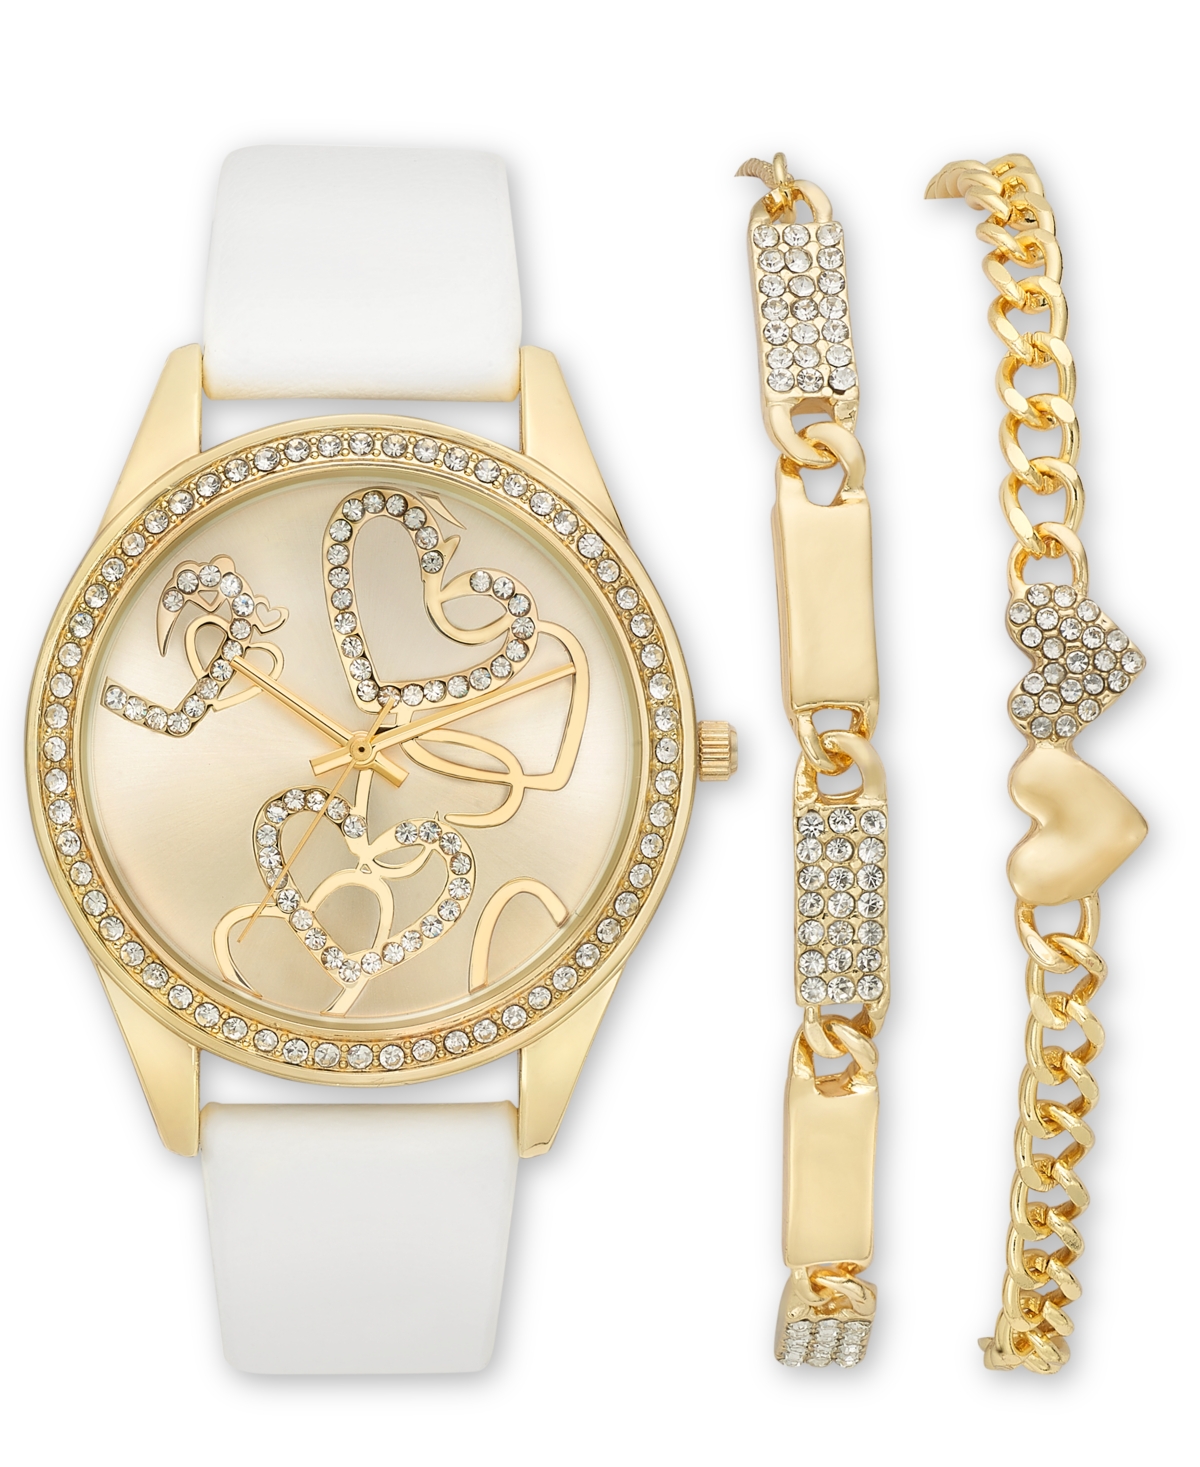 Women's White Strap Watch 39mm Gift Set, Created for Macy's - White